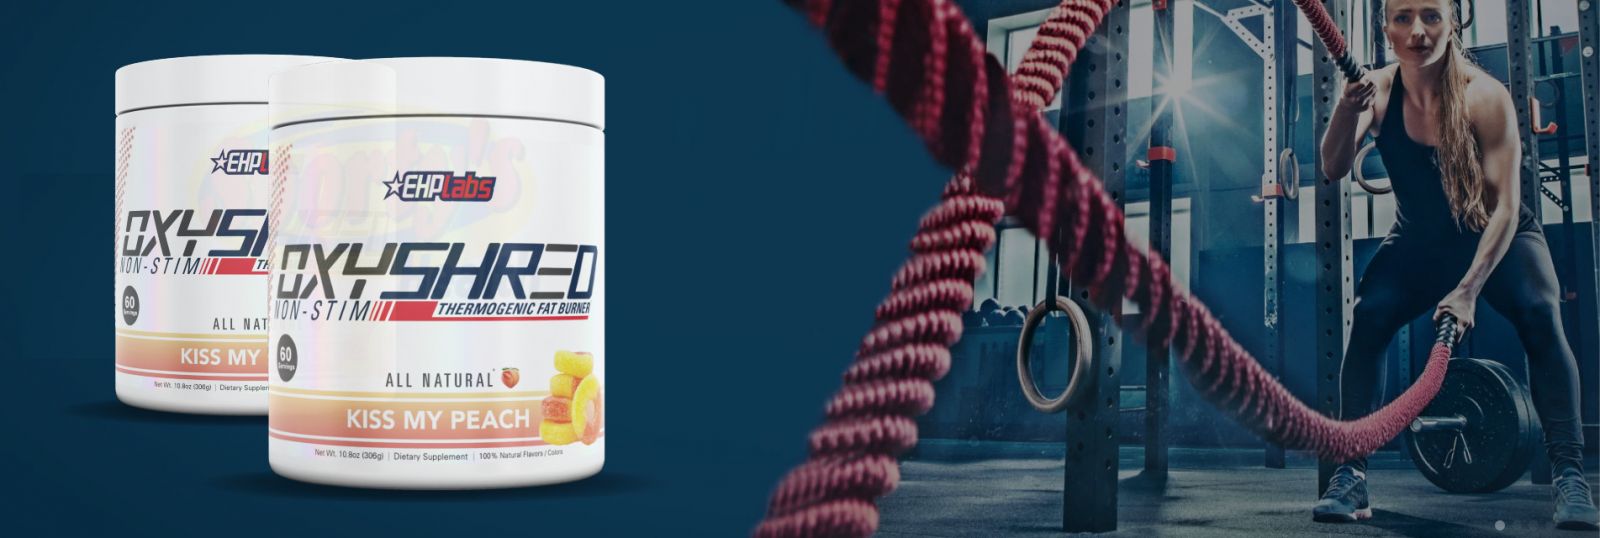 Oxyshred Non-Stim Product Banner